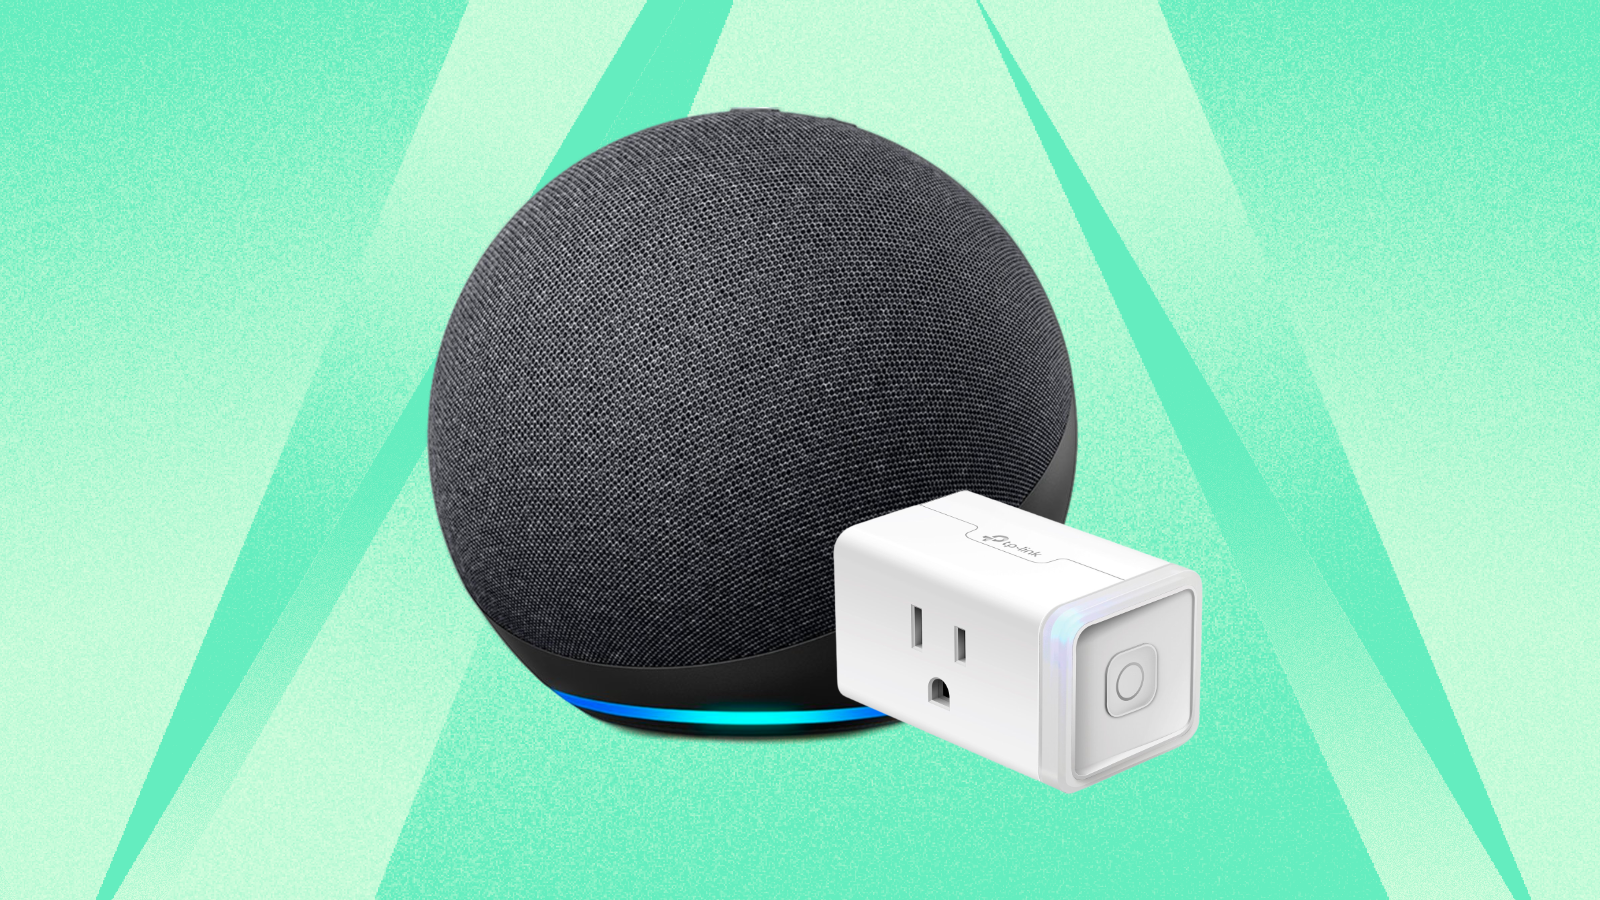 Best holiday deal: Buy a pre-lit holiday tree at  and get a free Echo  Pop smart speaker and free Smart Plug